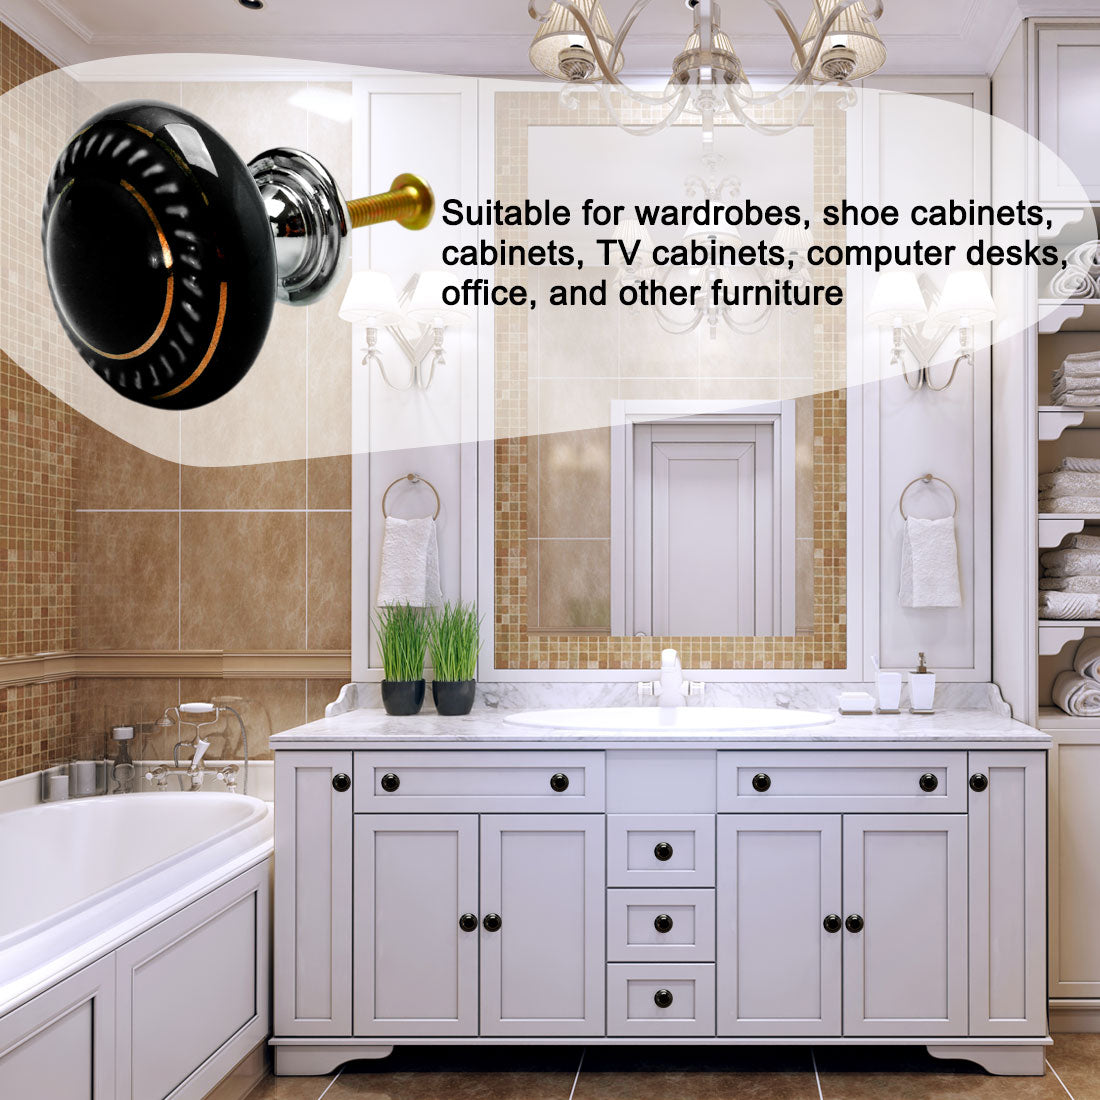 uxcell Uxcell Ceramic Vintage Knobs Drawer Pull Handle Cupboard Dresser 4pcs Gold Circle Black